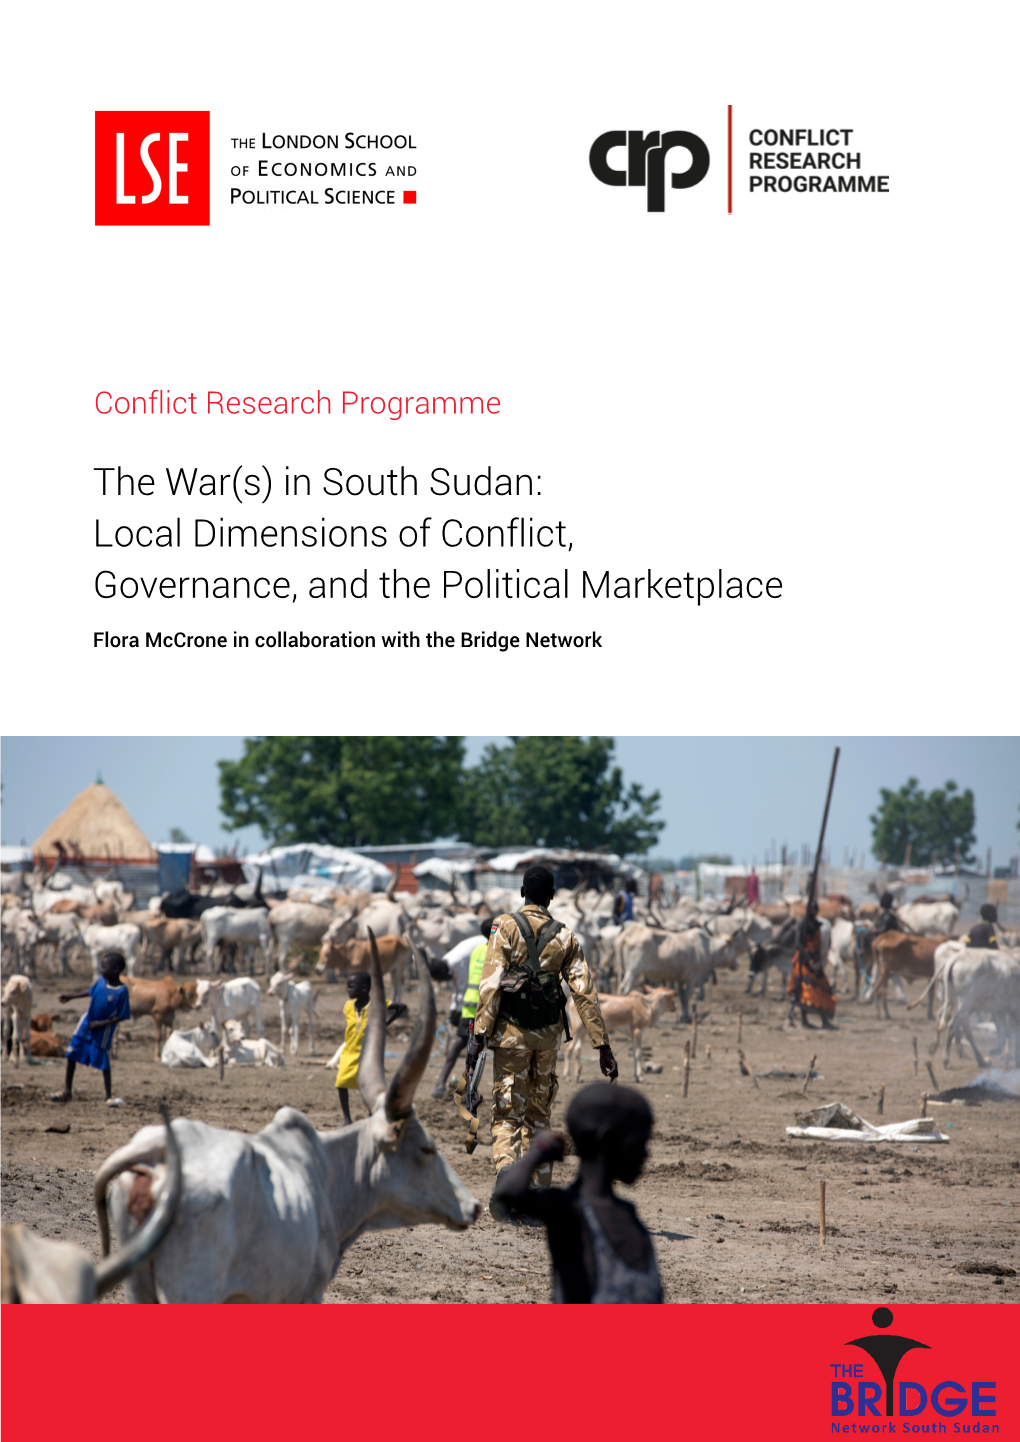 The War(S) in South Sudan: Local Dimensions of Conflict, Governance, and the Political Marketplace